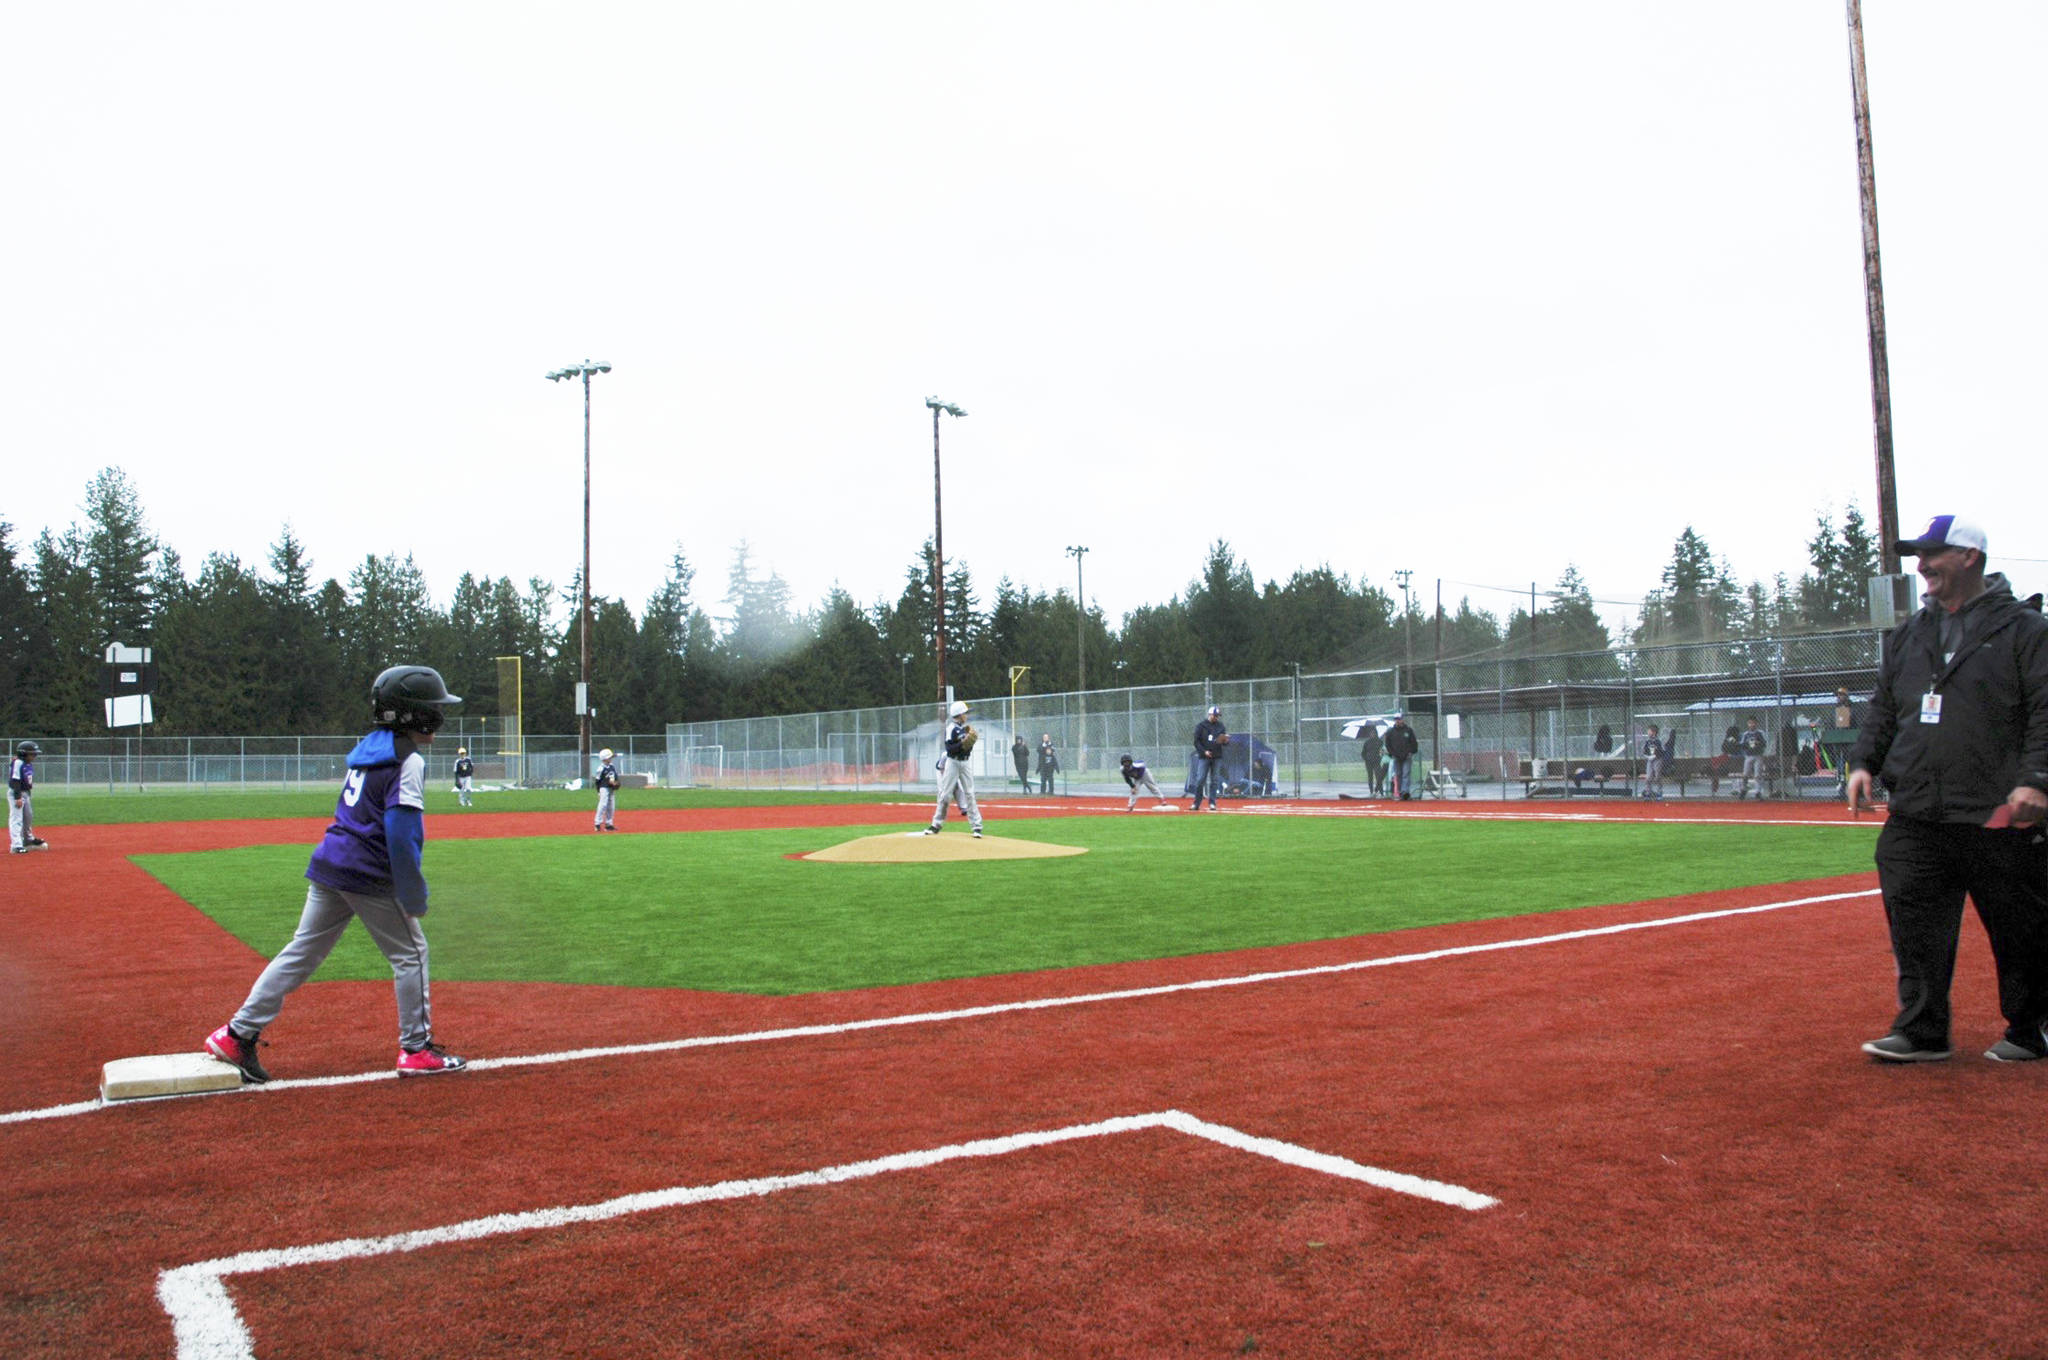 Stilly Valley Little League gets in game on new turf despite opening day rain